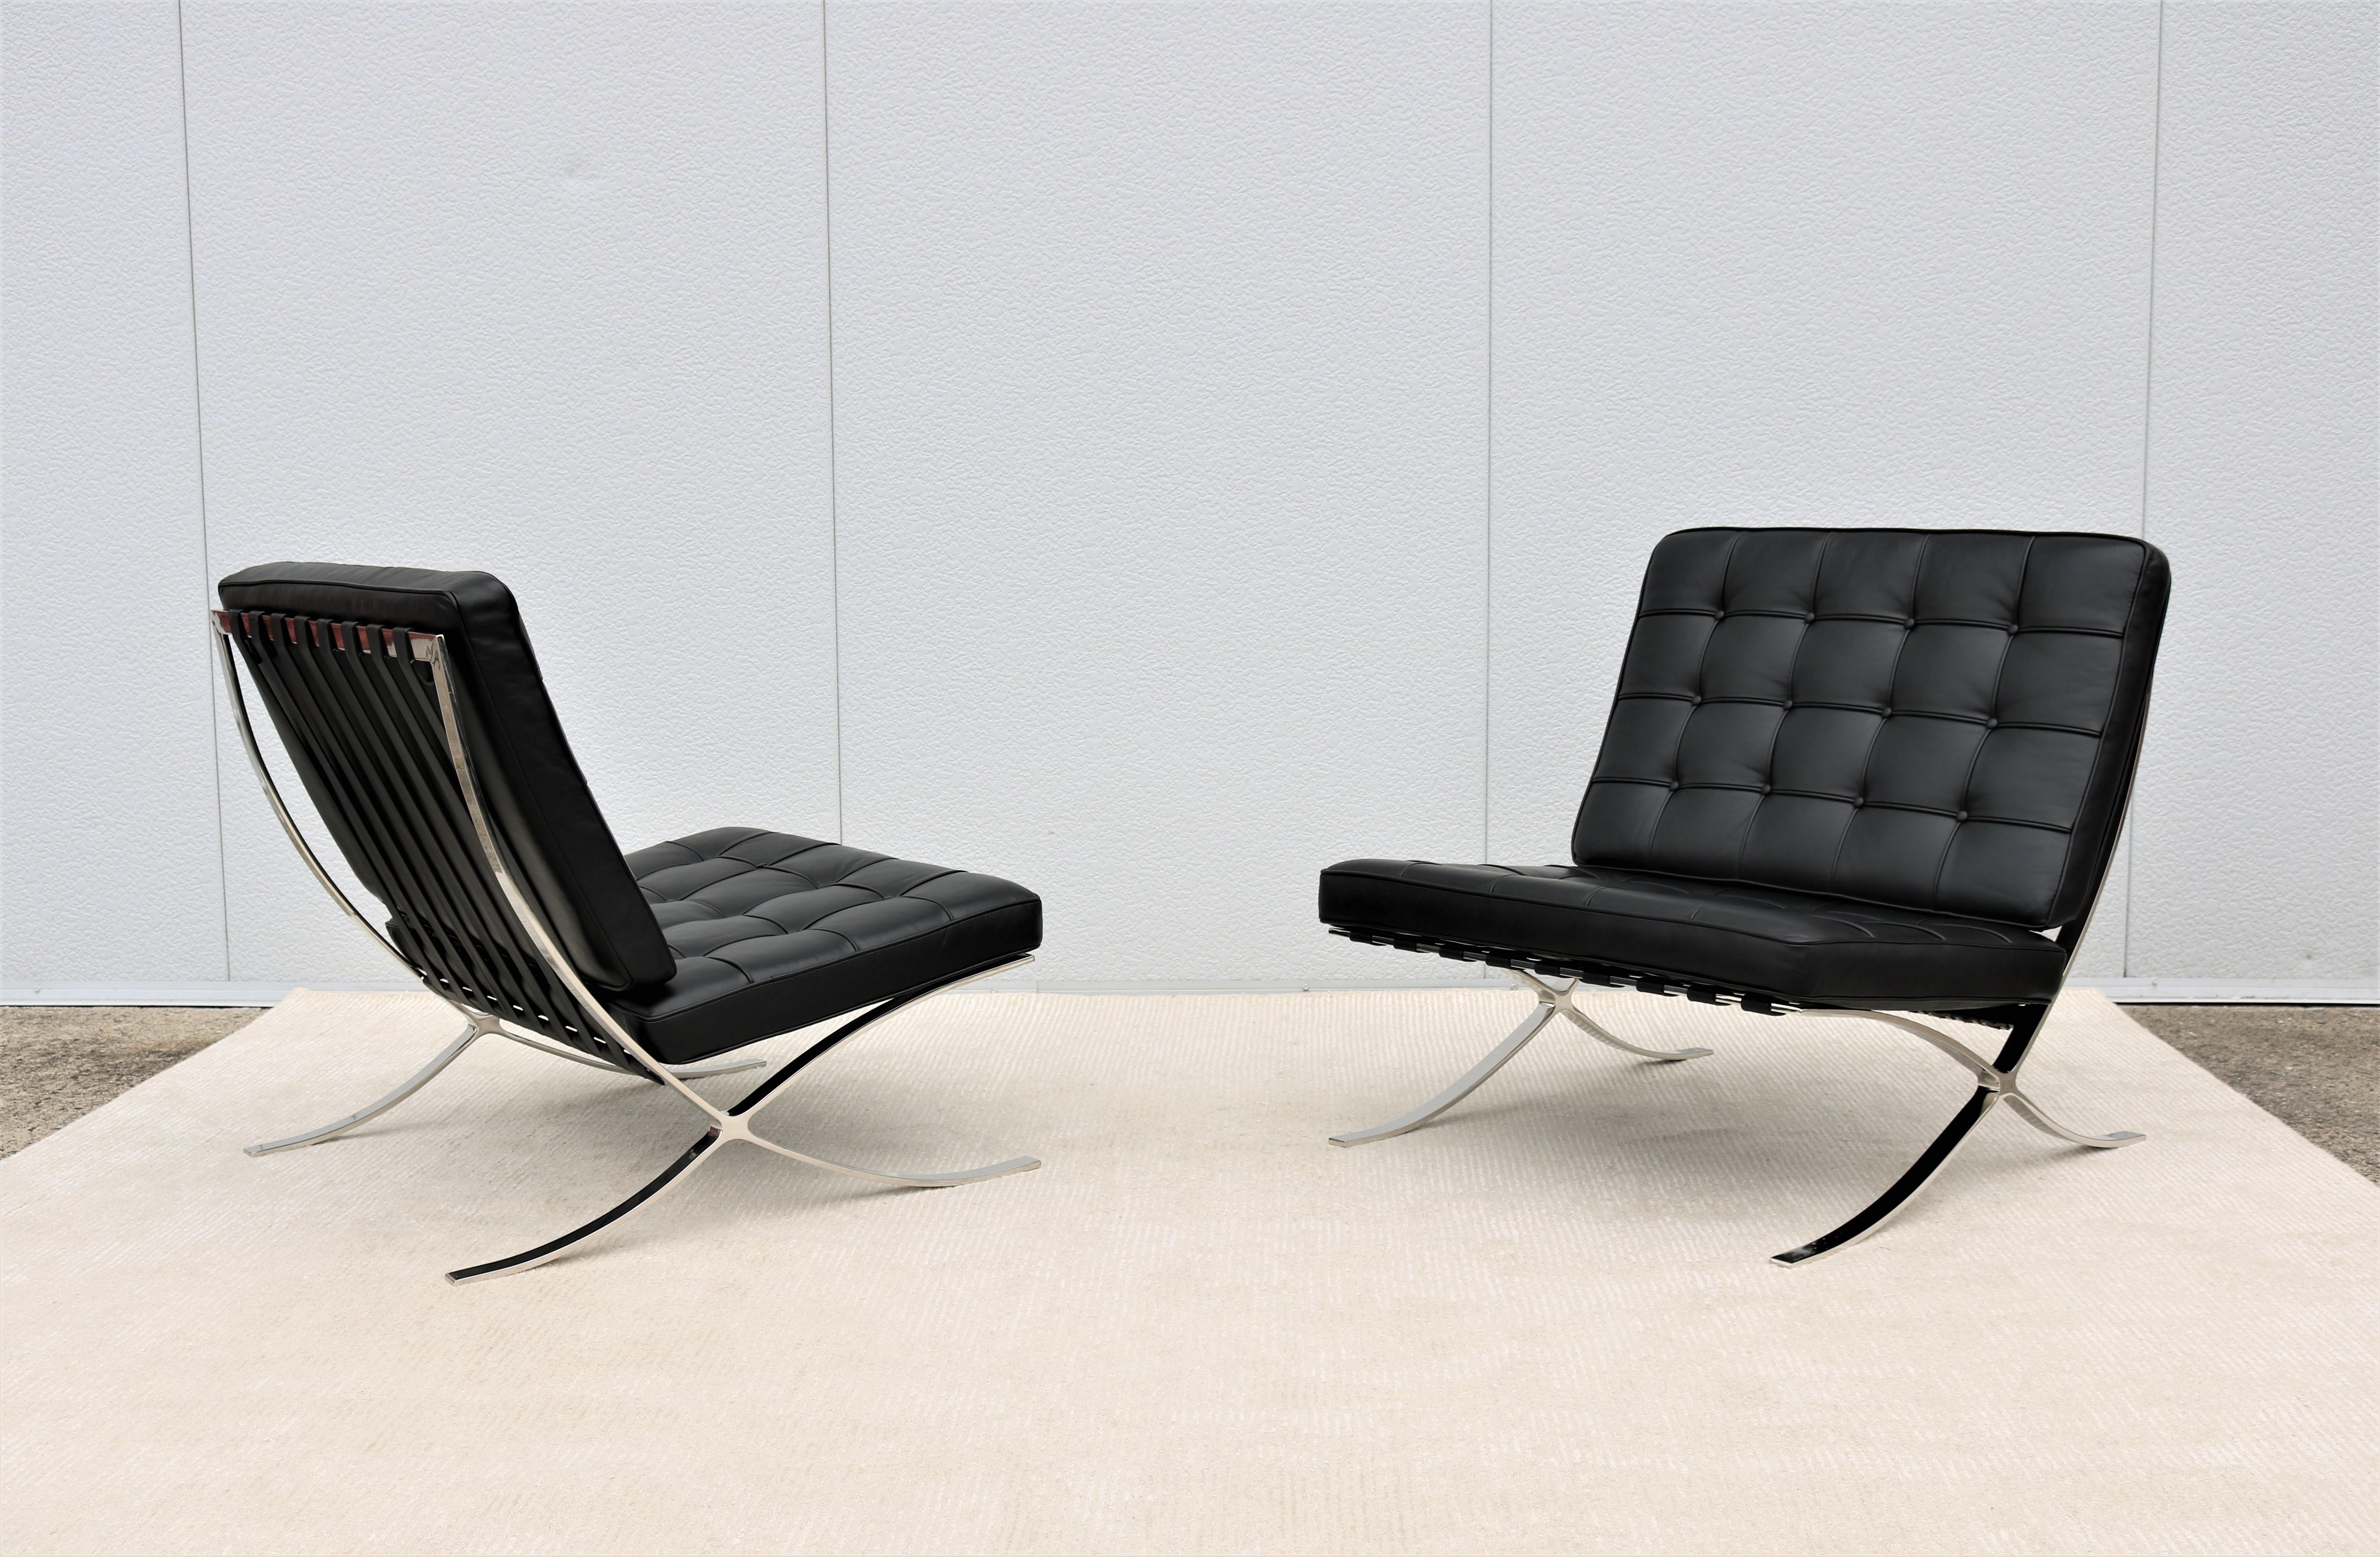 Stainless Steel Modernism Ludwig Mies van der Rohe Black Leather Barcelona Lounge Chairs, a Pair